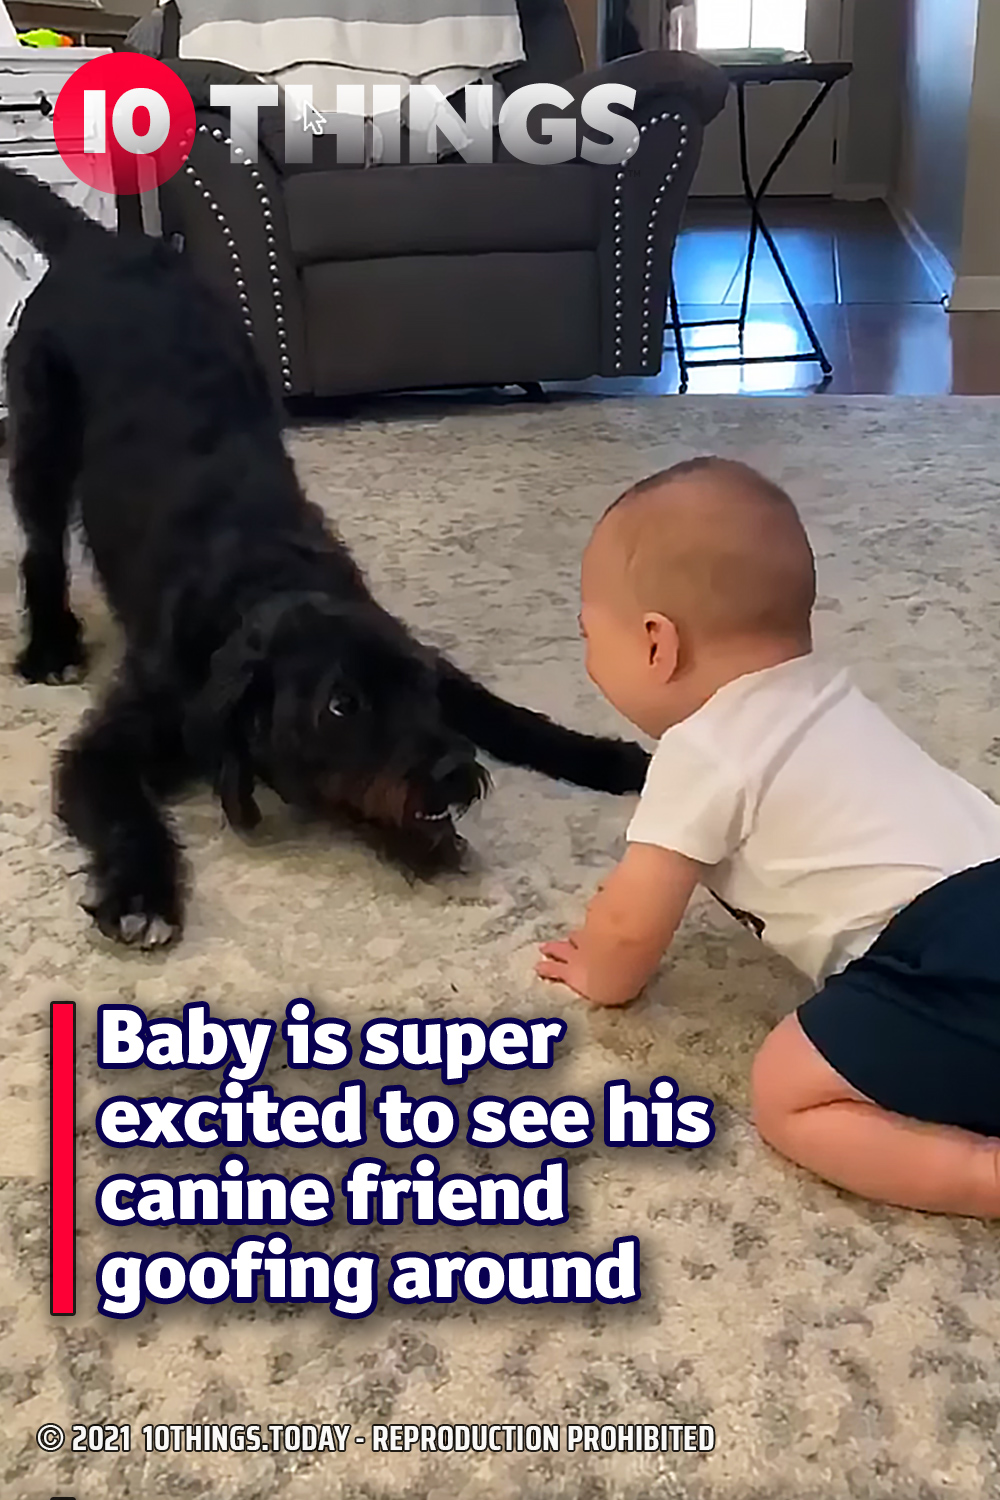 Baby is super excited to see his canine friend goofing around